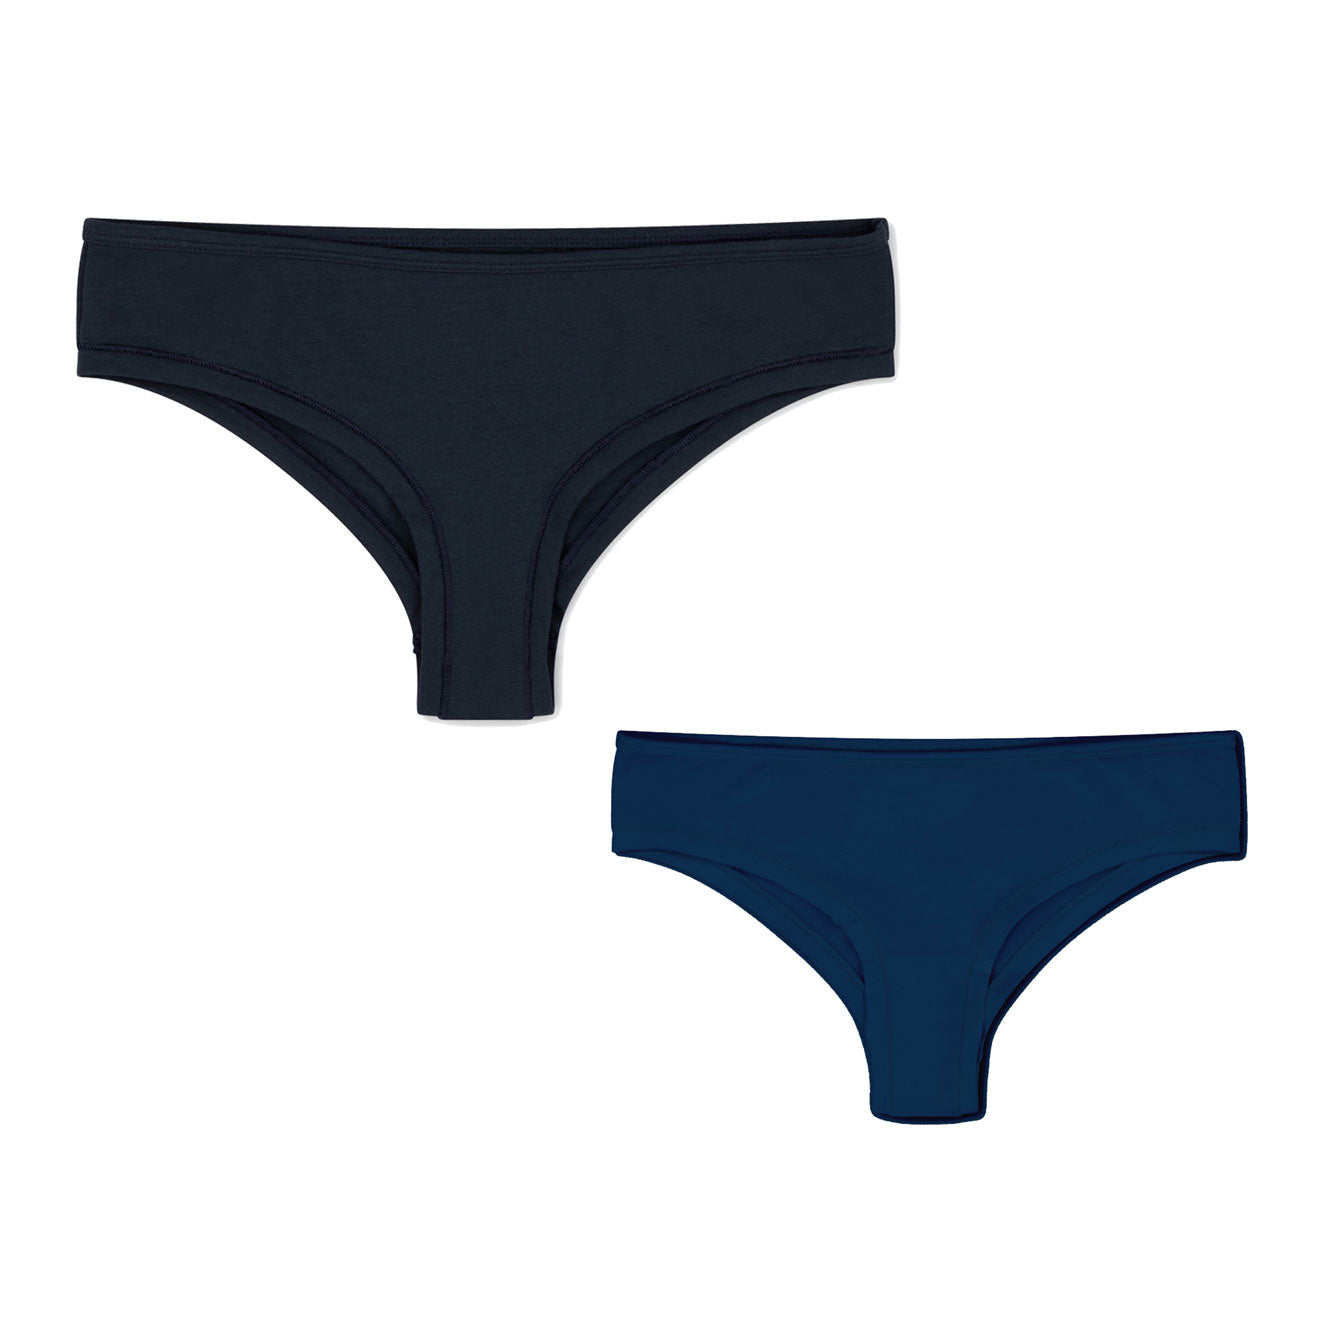  navy Black ladies underwear, everyday cheeky fit briefs, first fit promise 2 pack